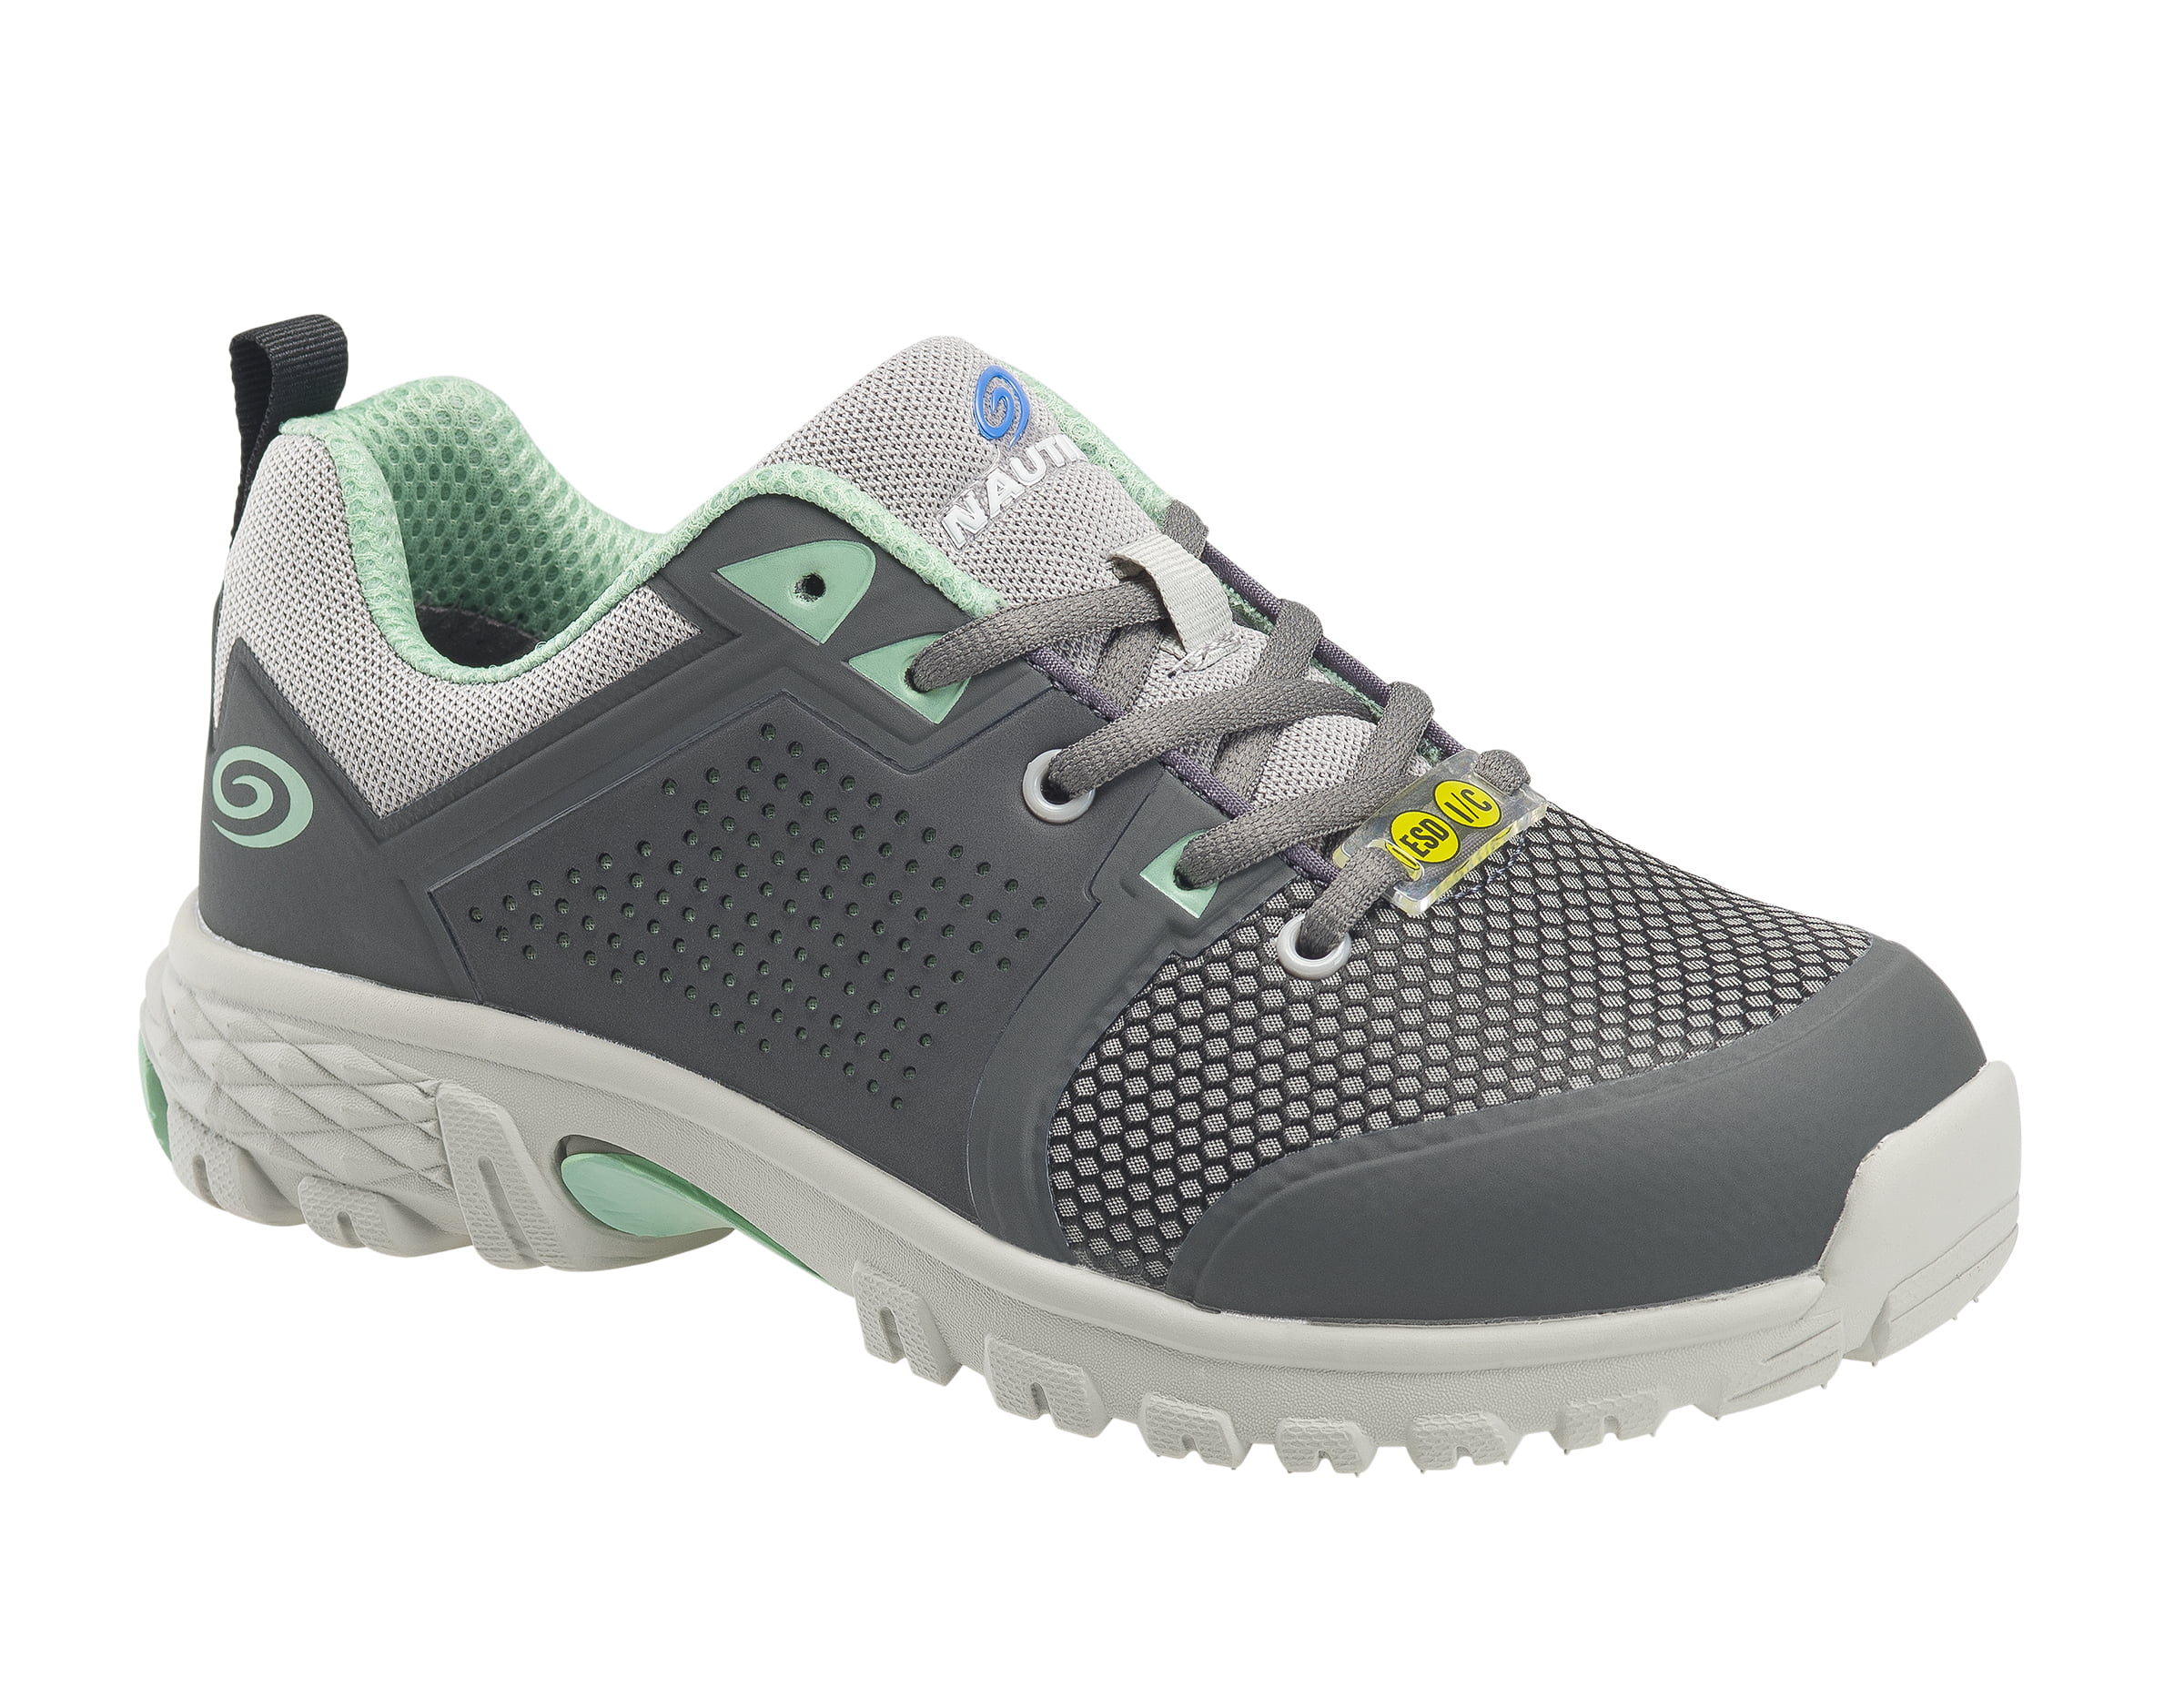 Buy > athletic safety shoe > in stock